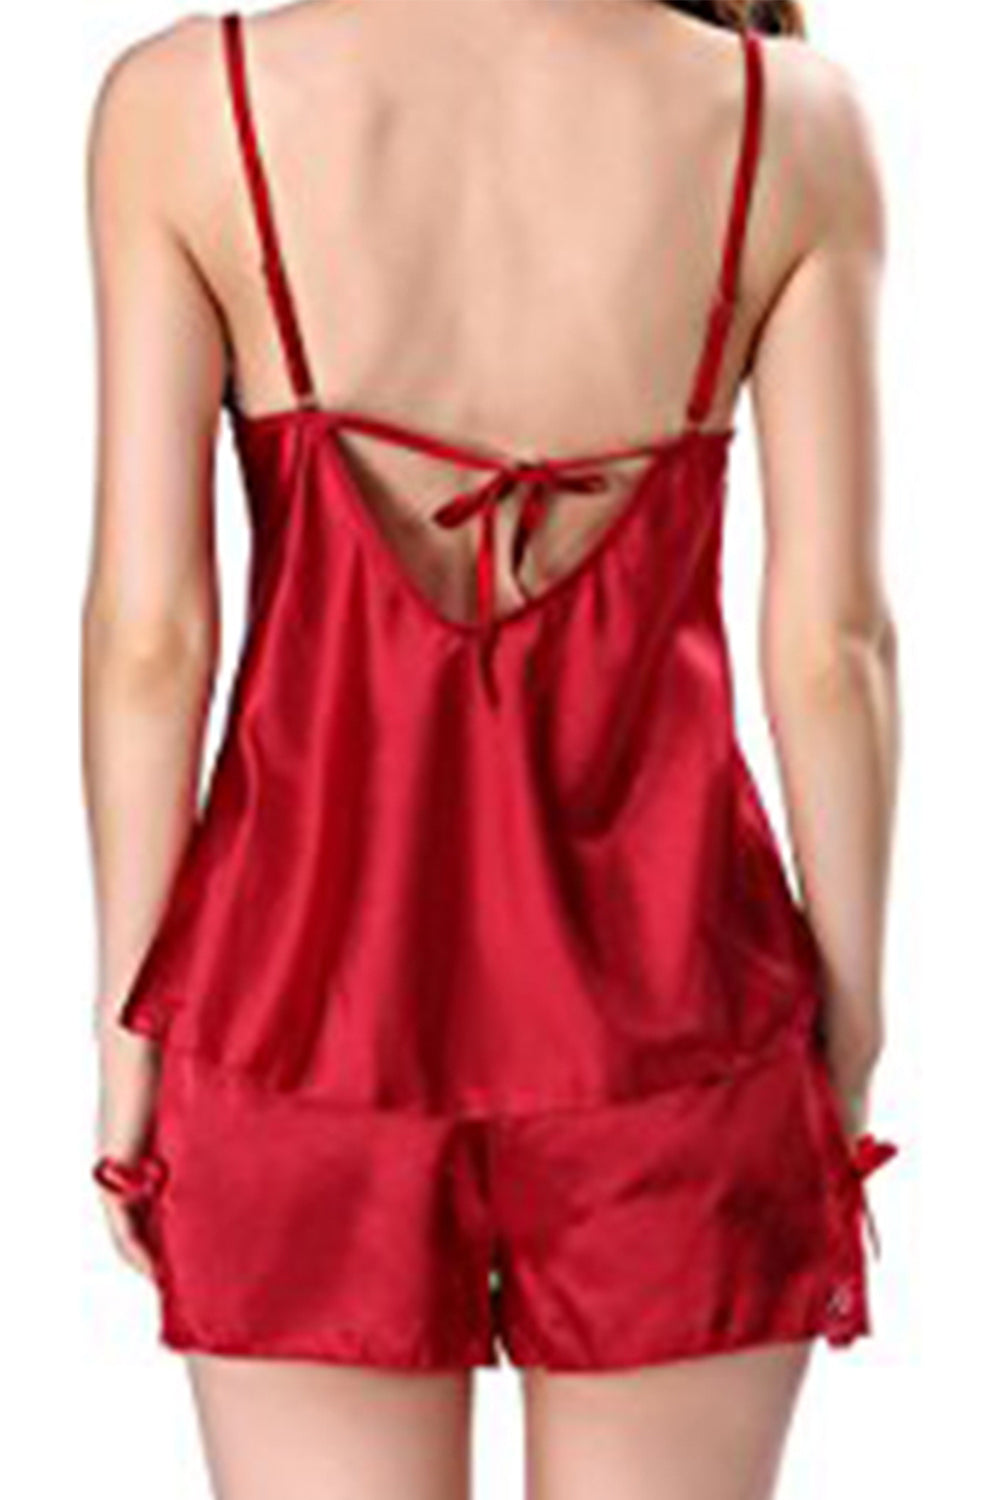 Ketty More Silk Mini Short And A Top Lingerie Set Is Beautiful And Pretty To Wear-KMWL911